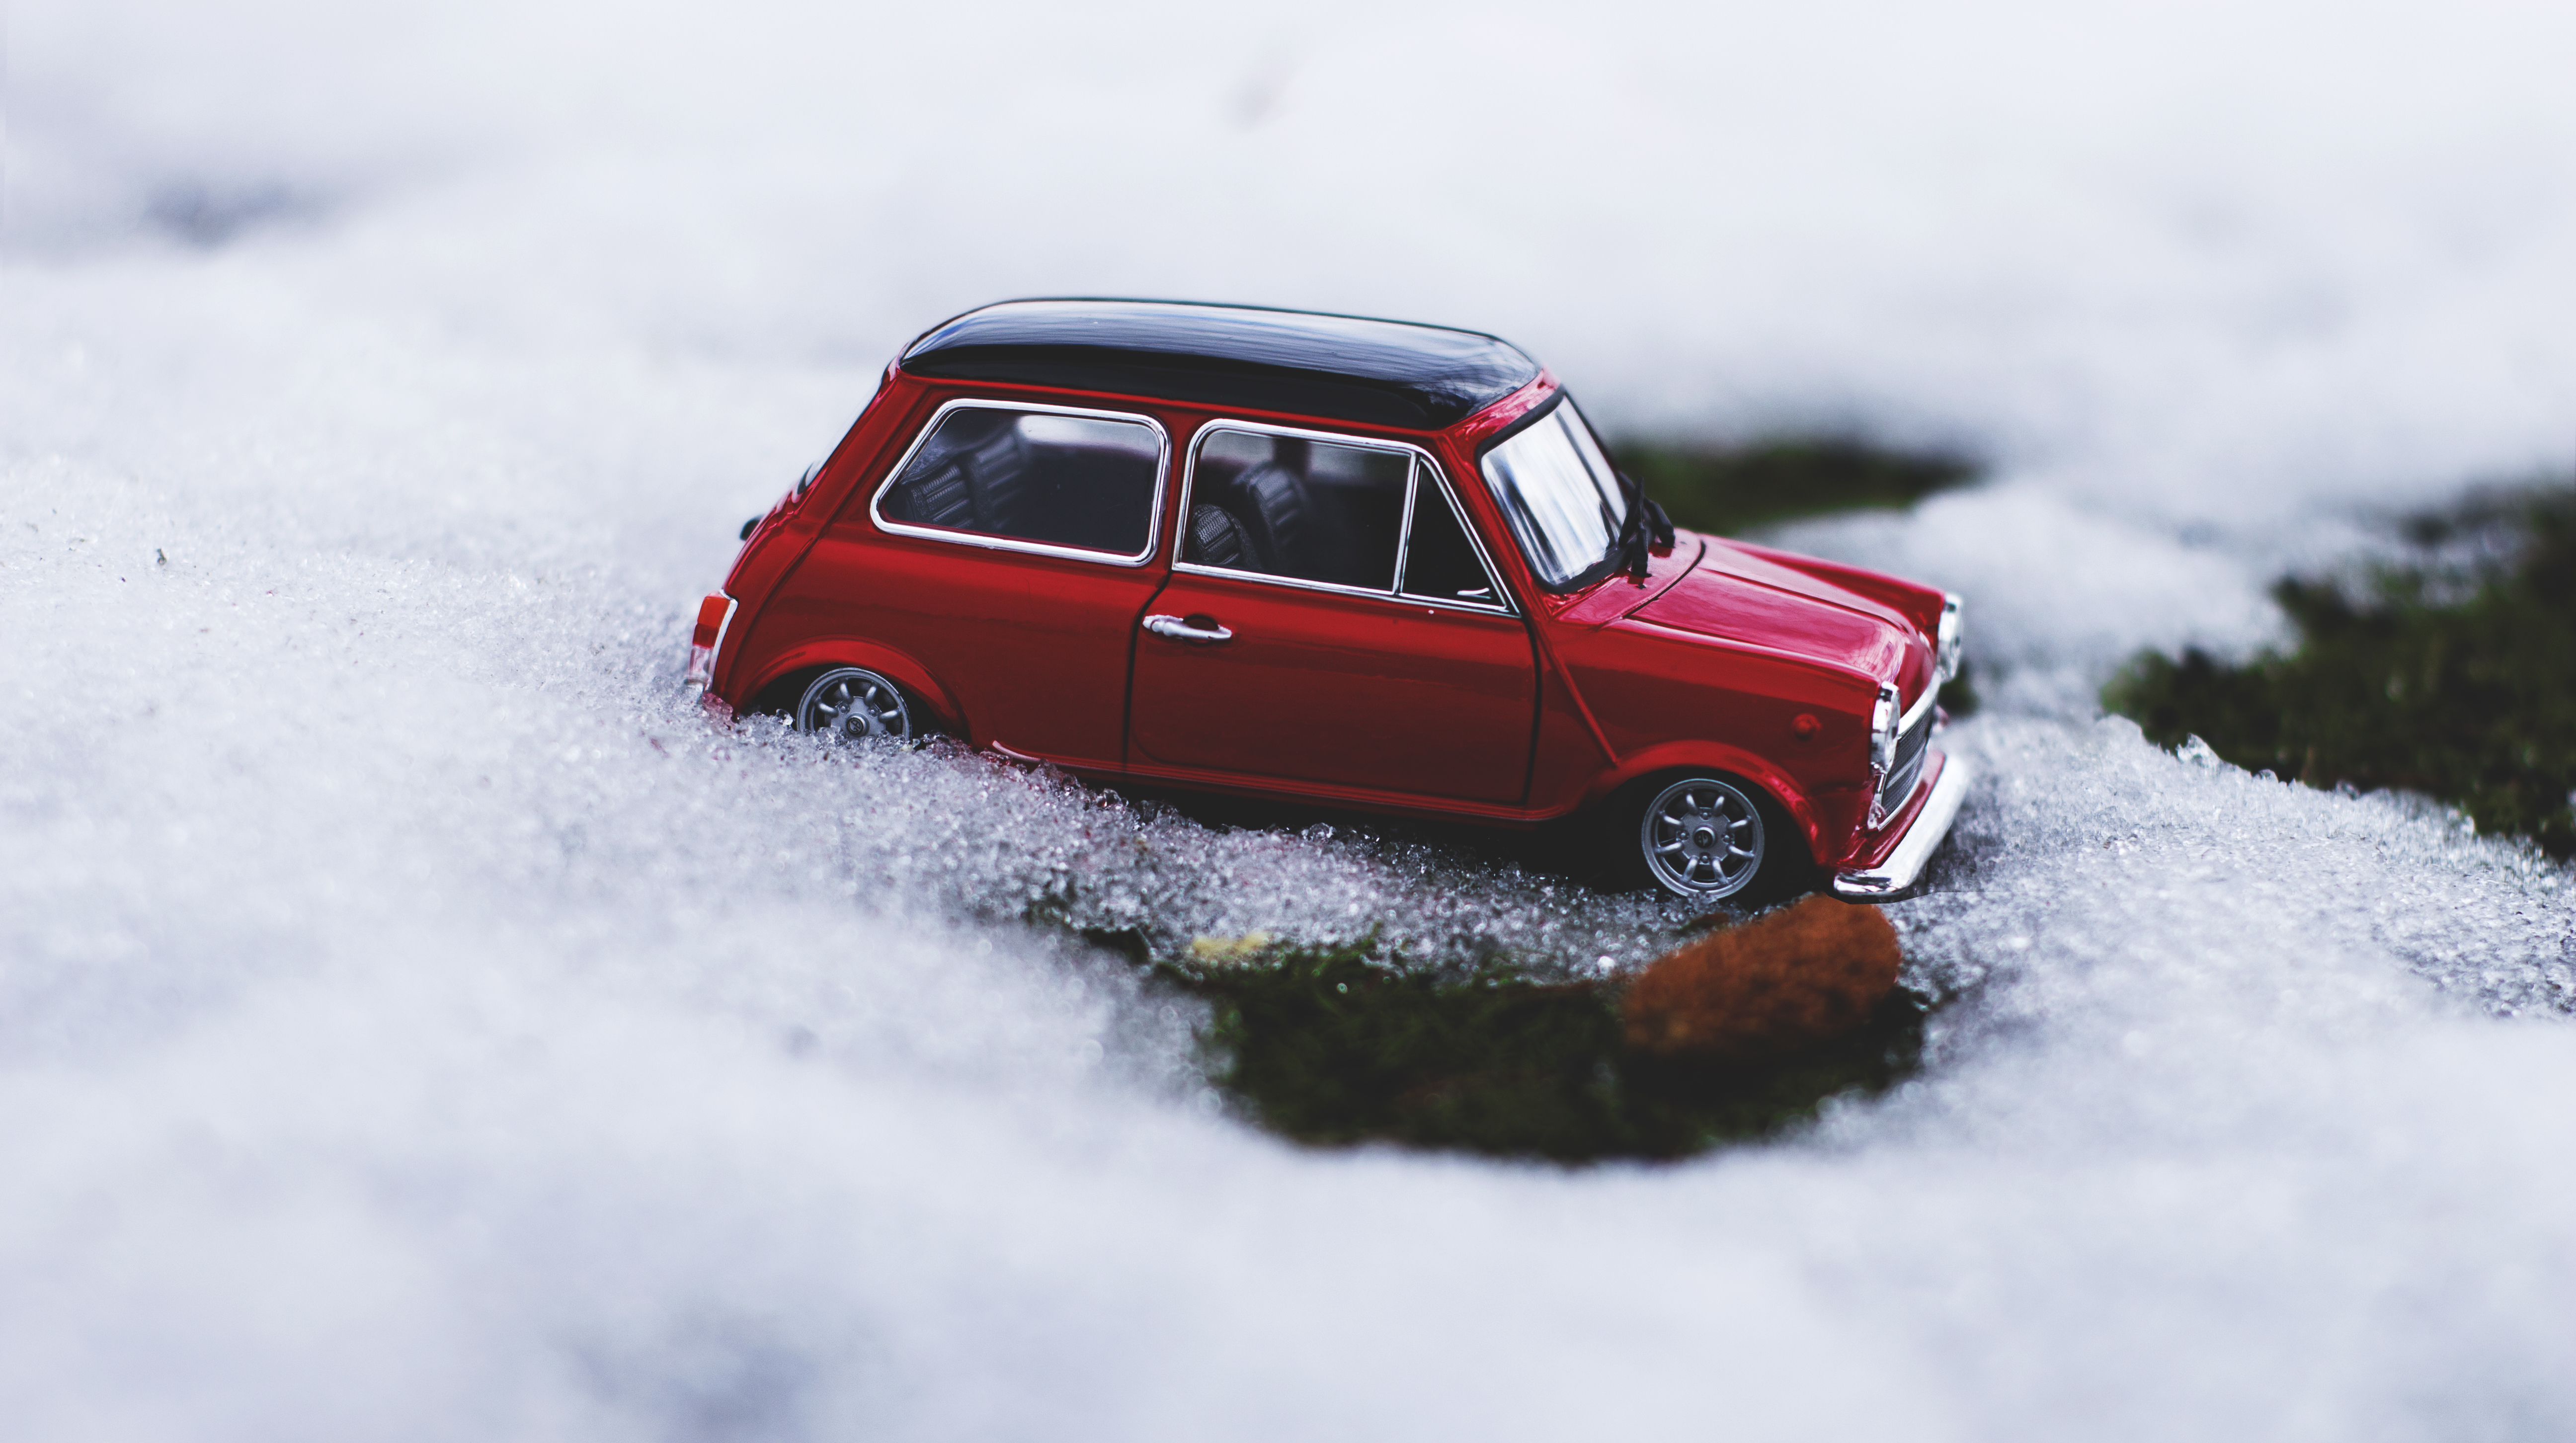 Car Toy Toys Mini Snow Red Cars Macro Miniatures Red 5184x2904